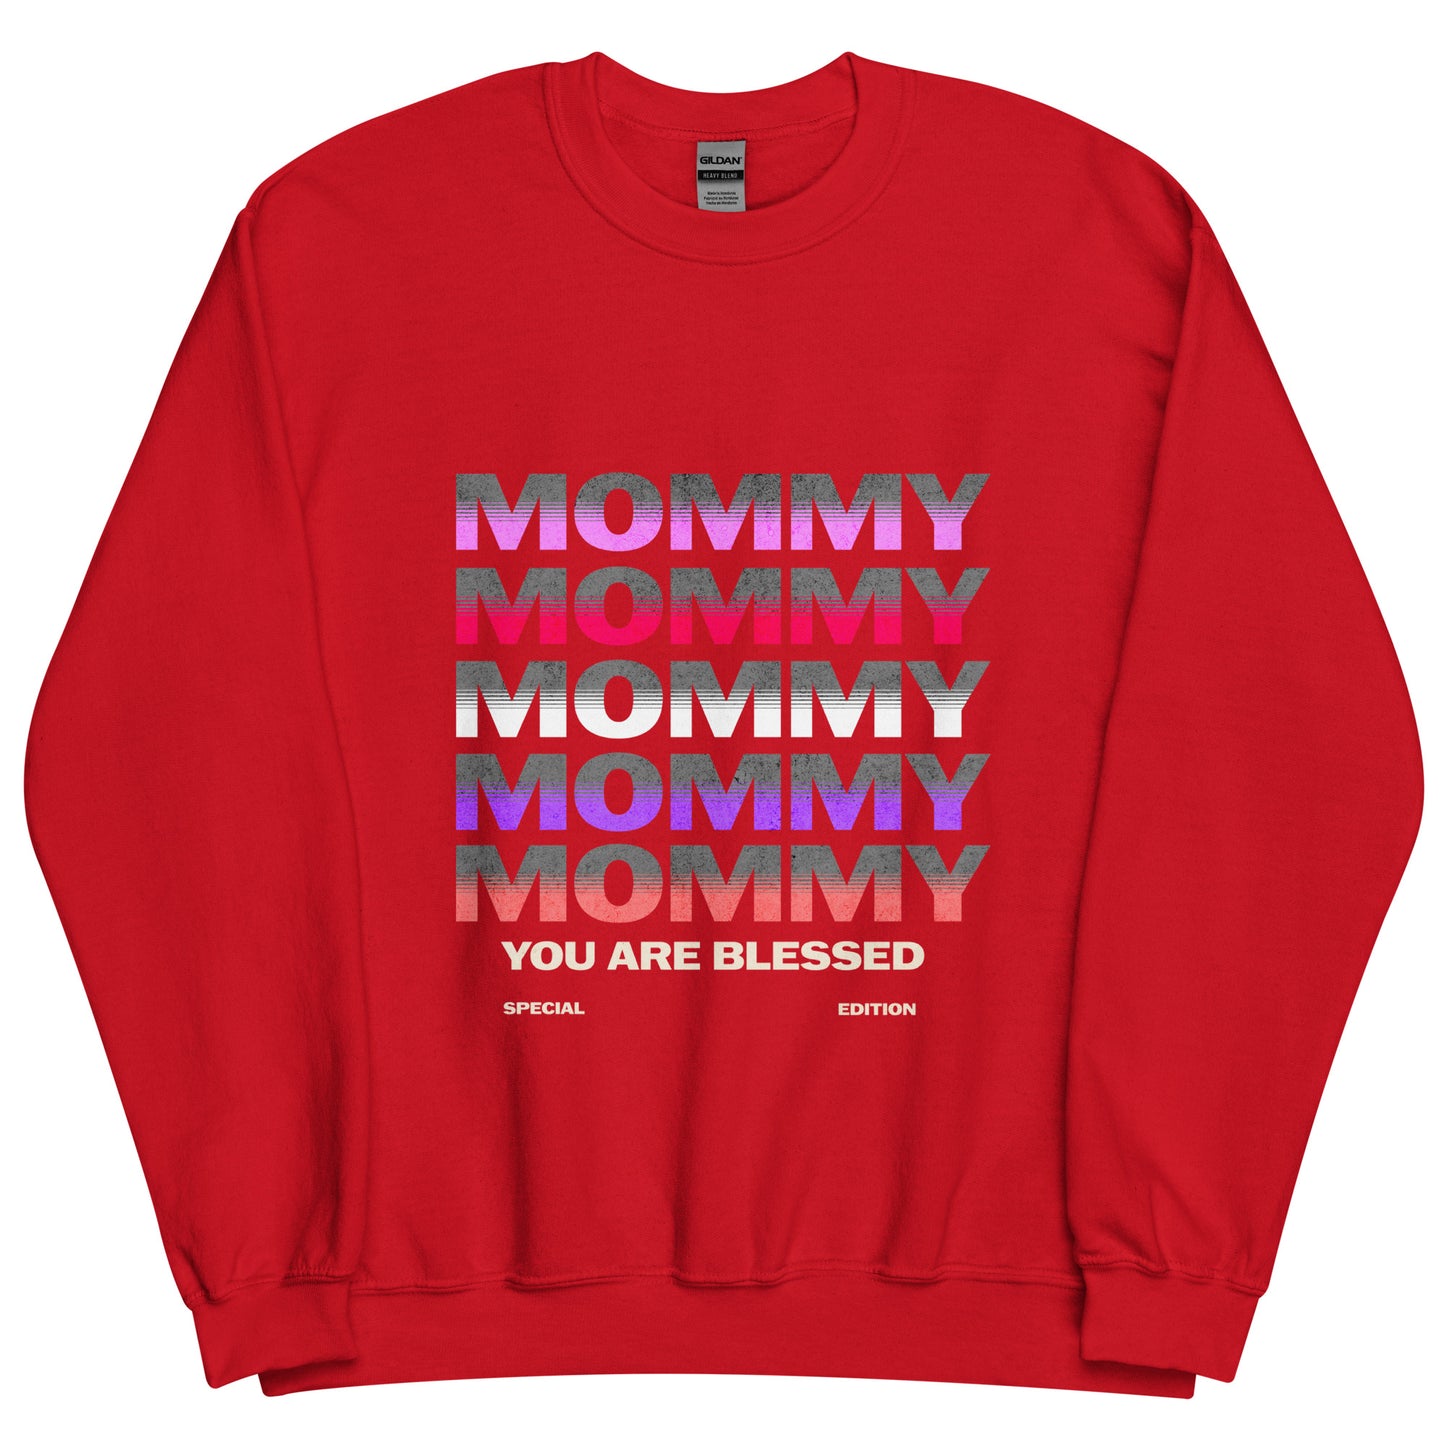 MOMMY Your Are BLESSED Special Edition Crewneck Sweatshirt-sweatshirt-Red-S-mysticalcherry